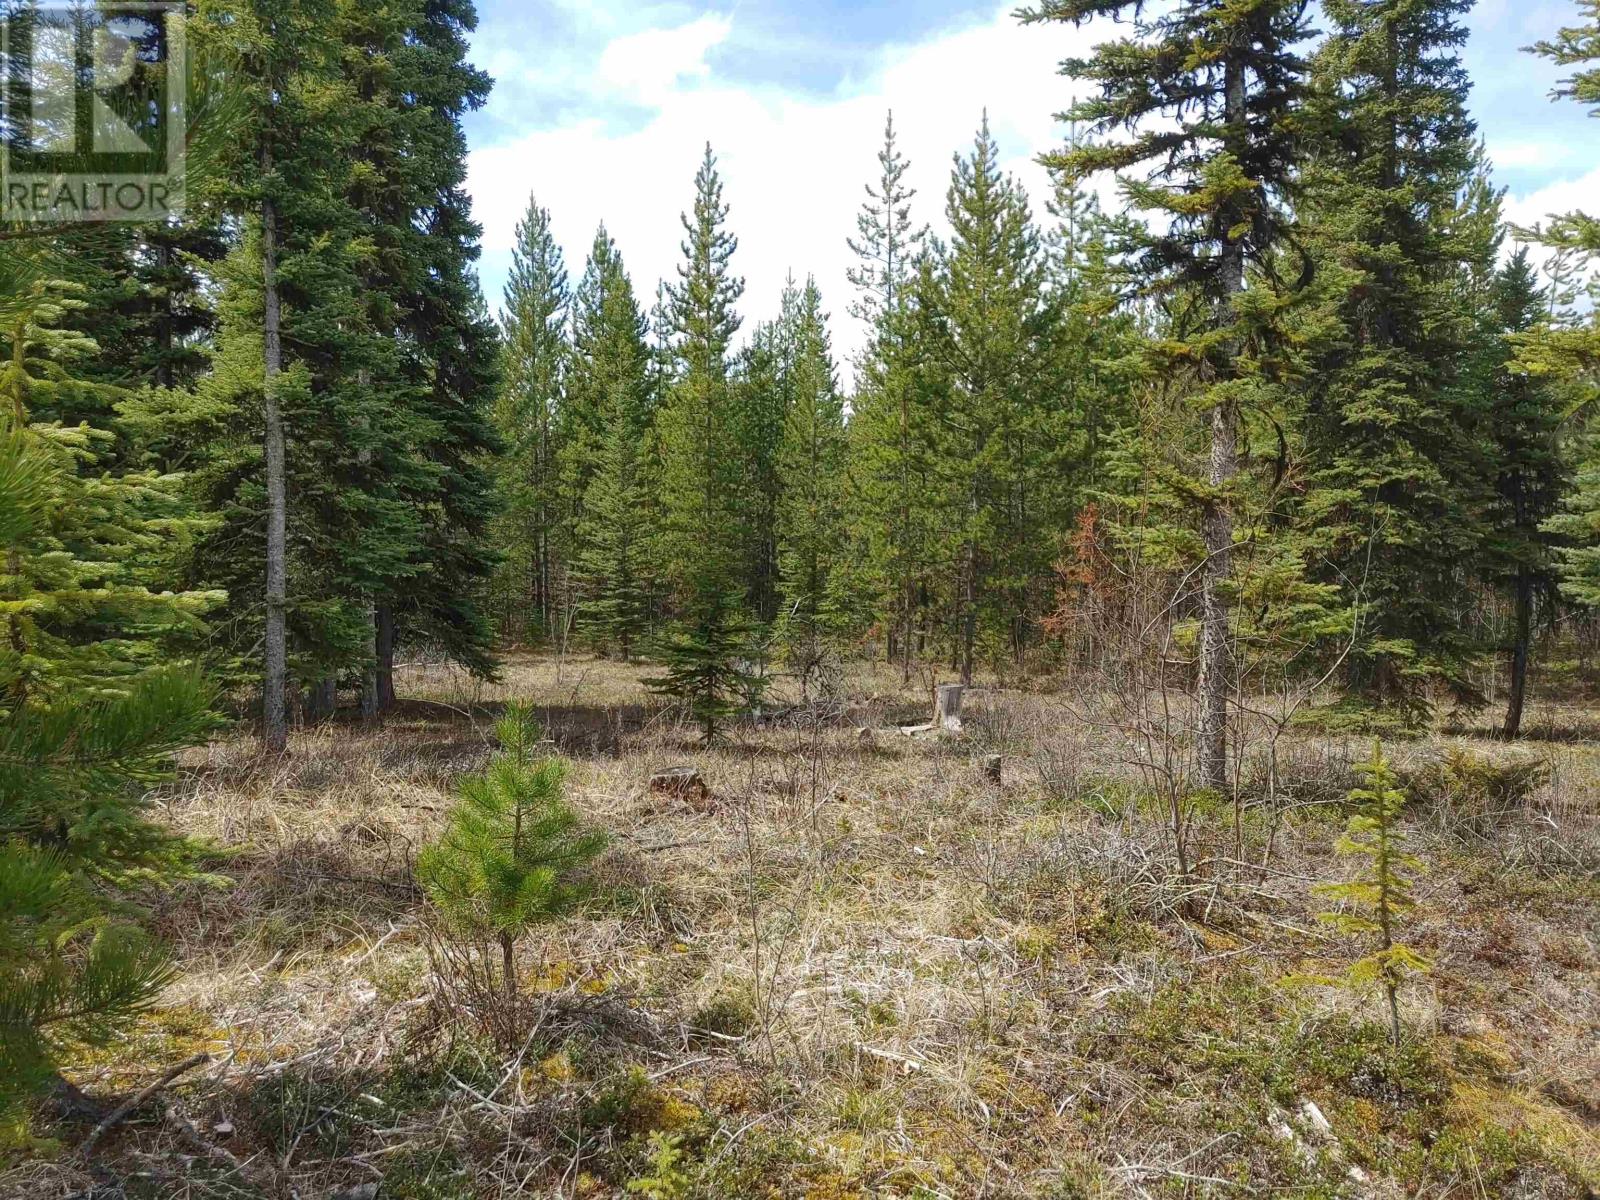 LOT 3 AGER ROAD located in Burns Lake, British Columbia